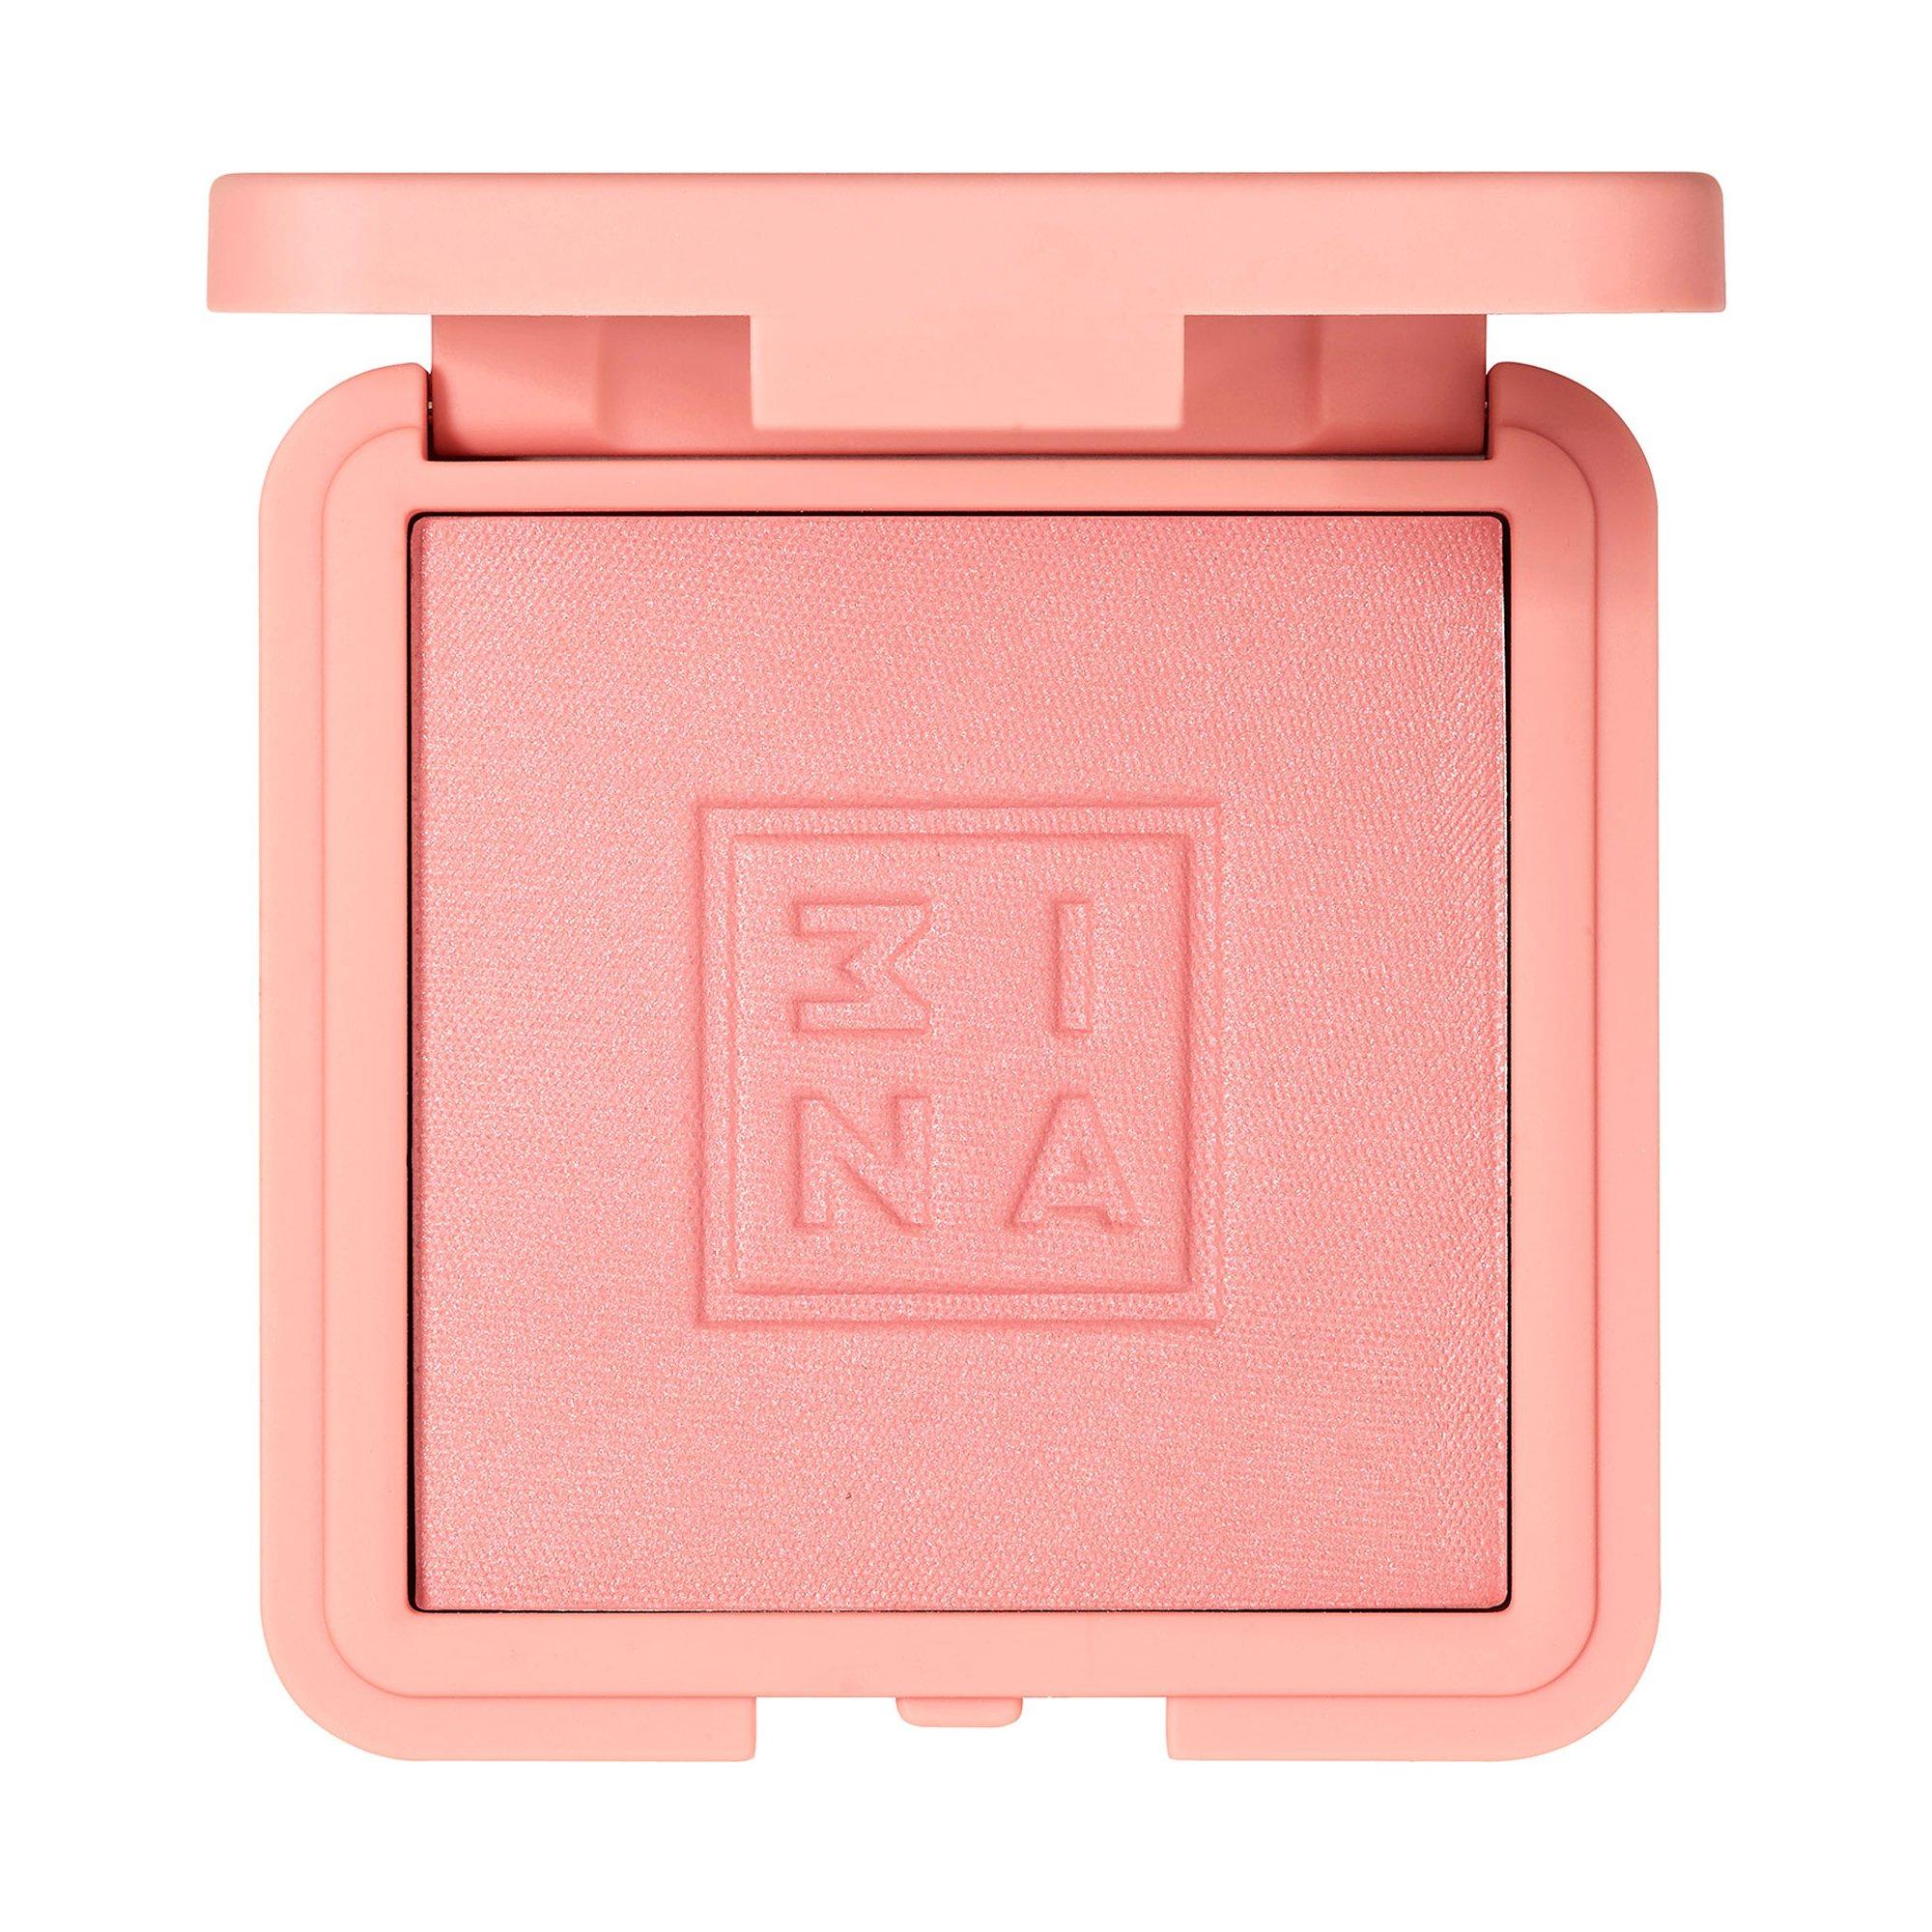 3INA Le fard à joues Blush 7.5 g Nude